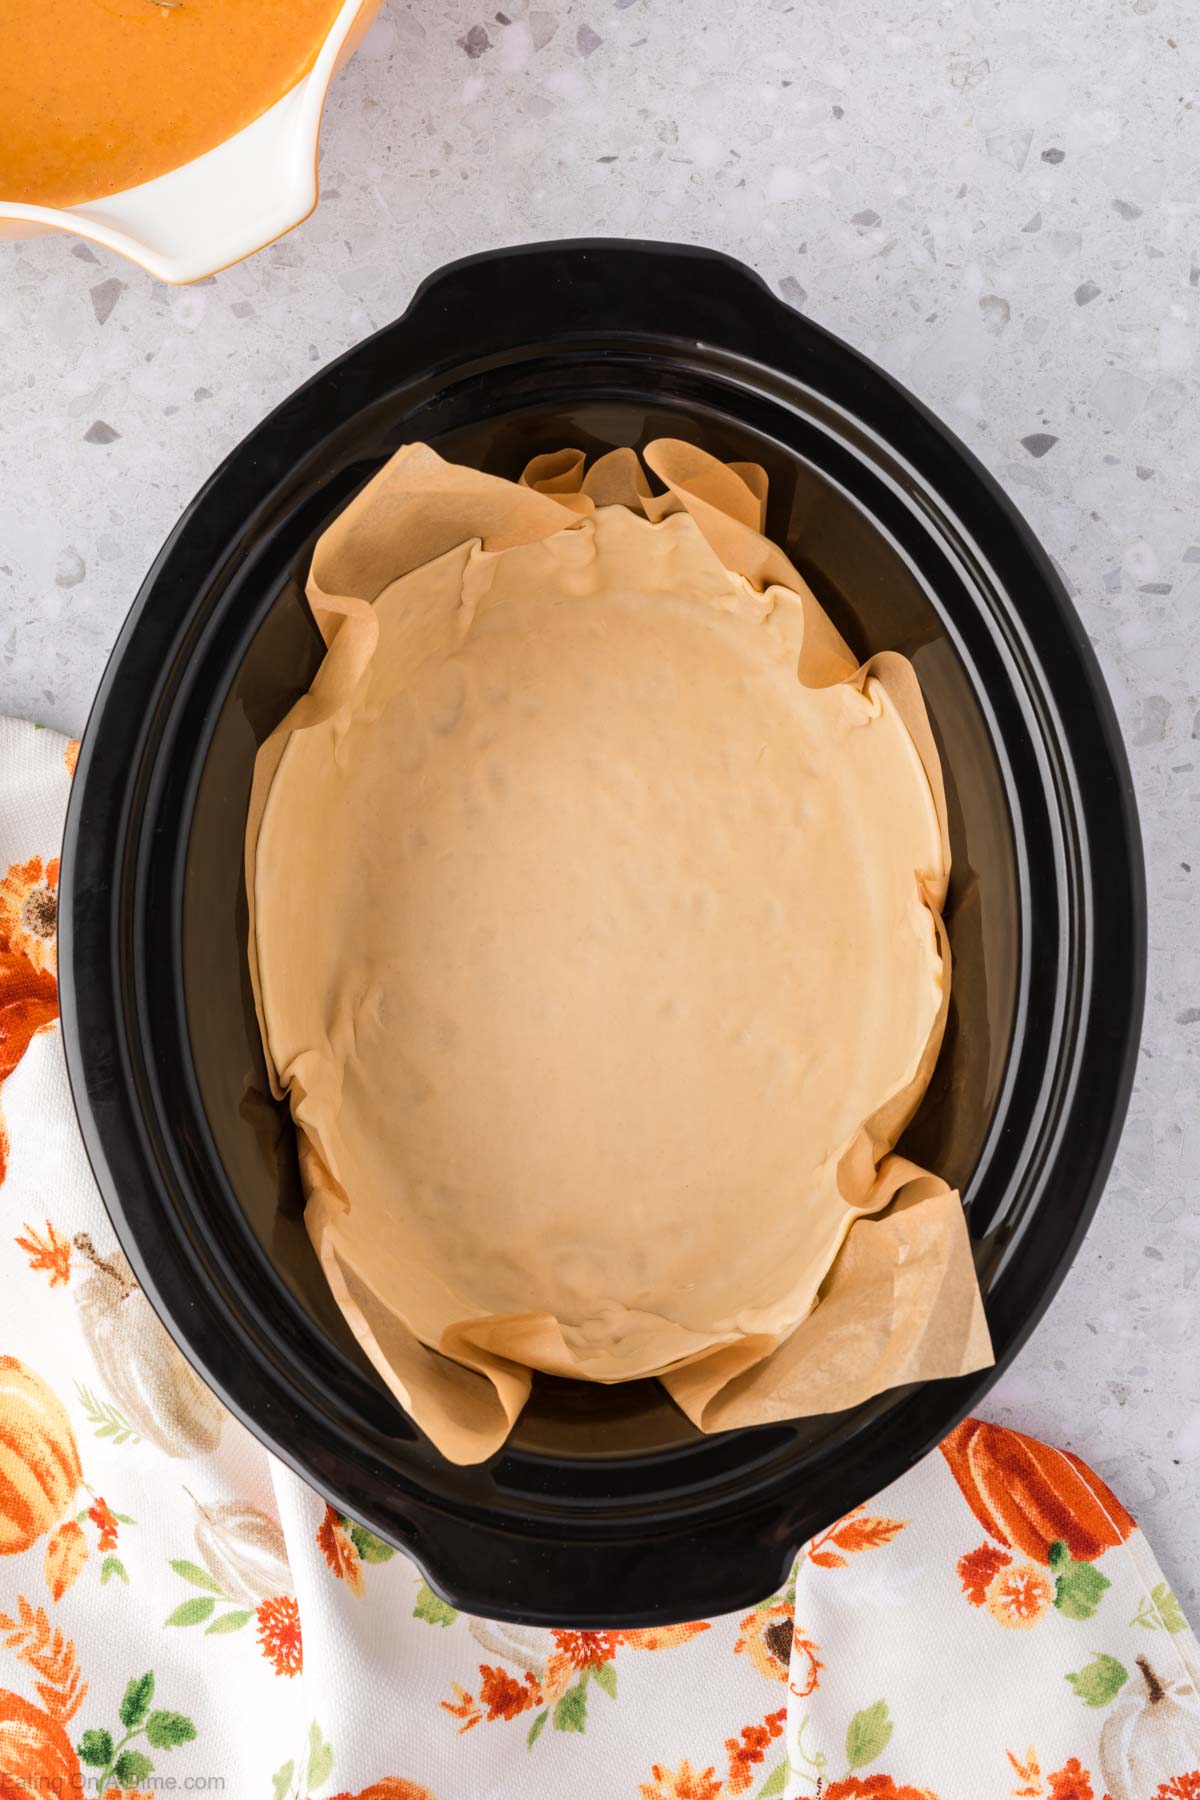 Placing the pie crust dough in the slow cooker 